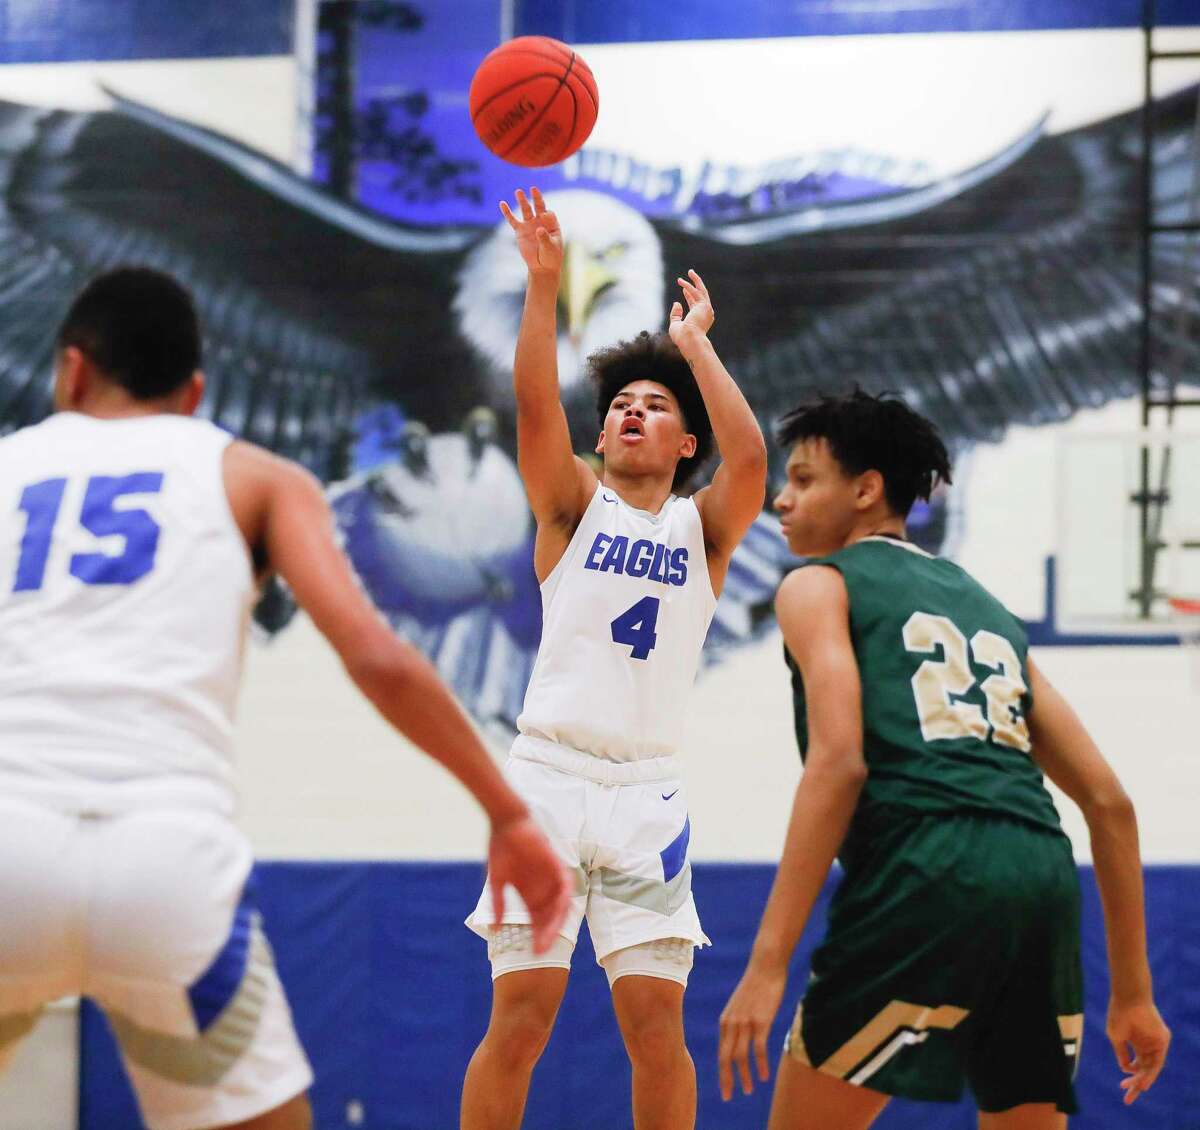 New Caney point guard Dylan Dempsey (4), shown here earlier in the season, contributed to the Eagles close game against Kingwood Park Tuesday night.